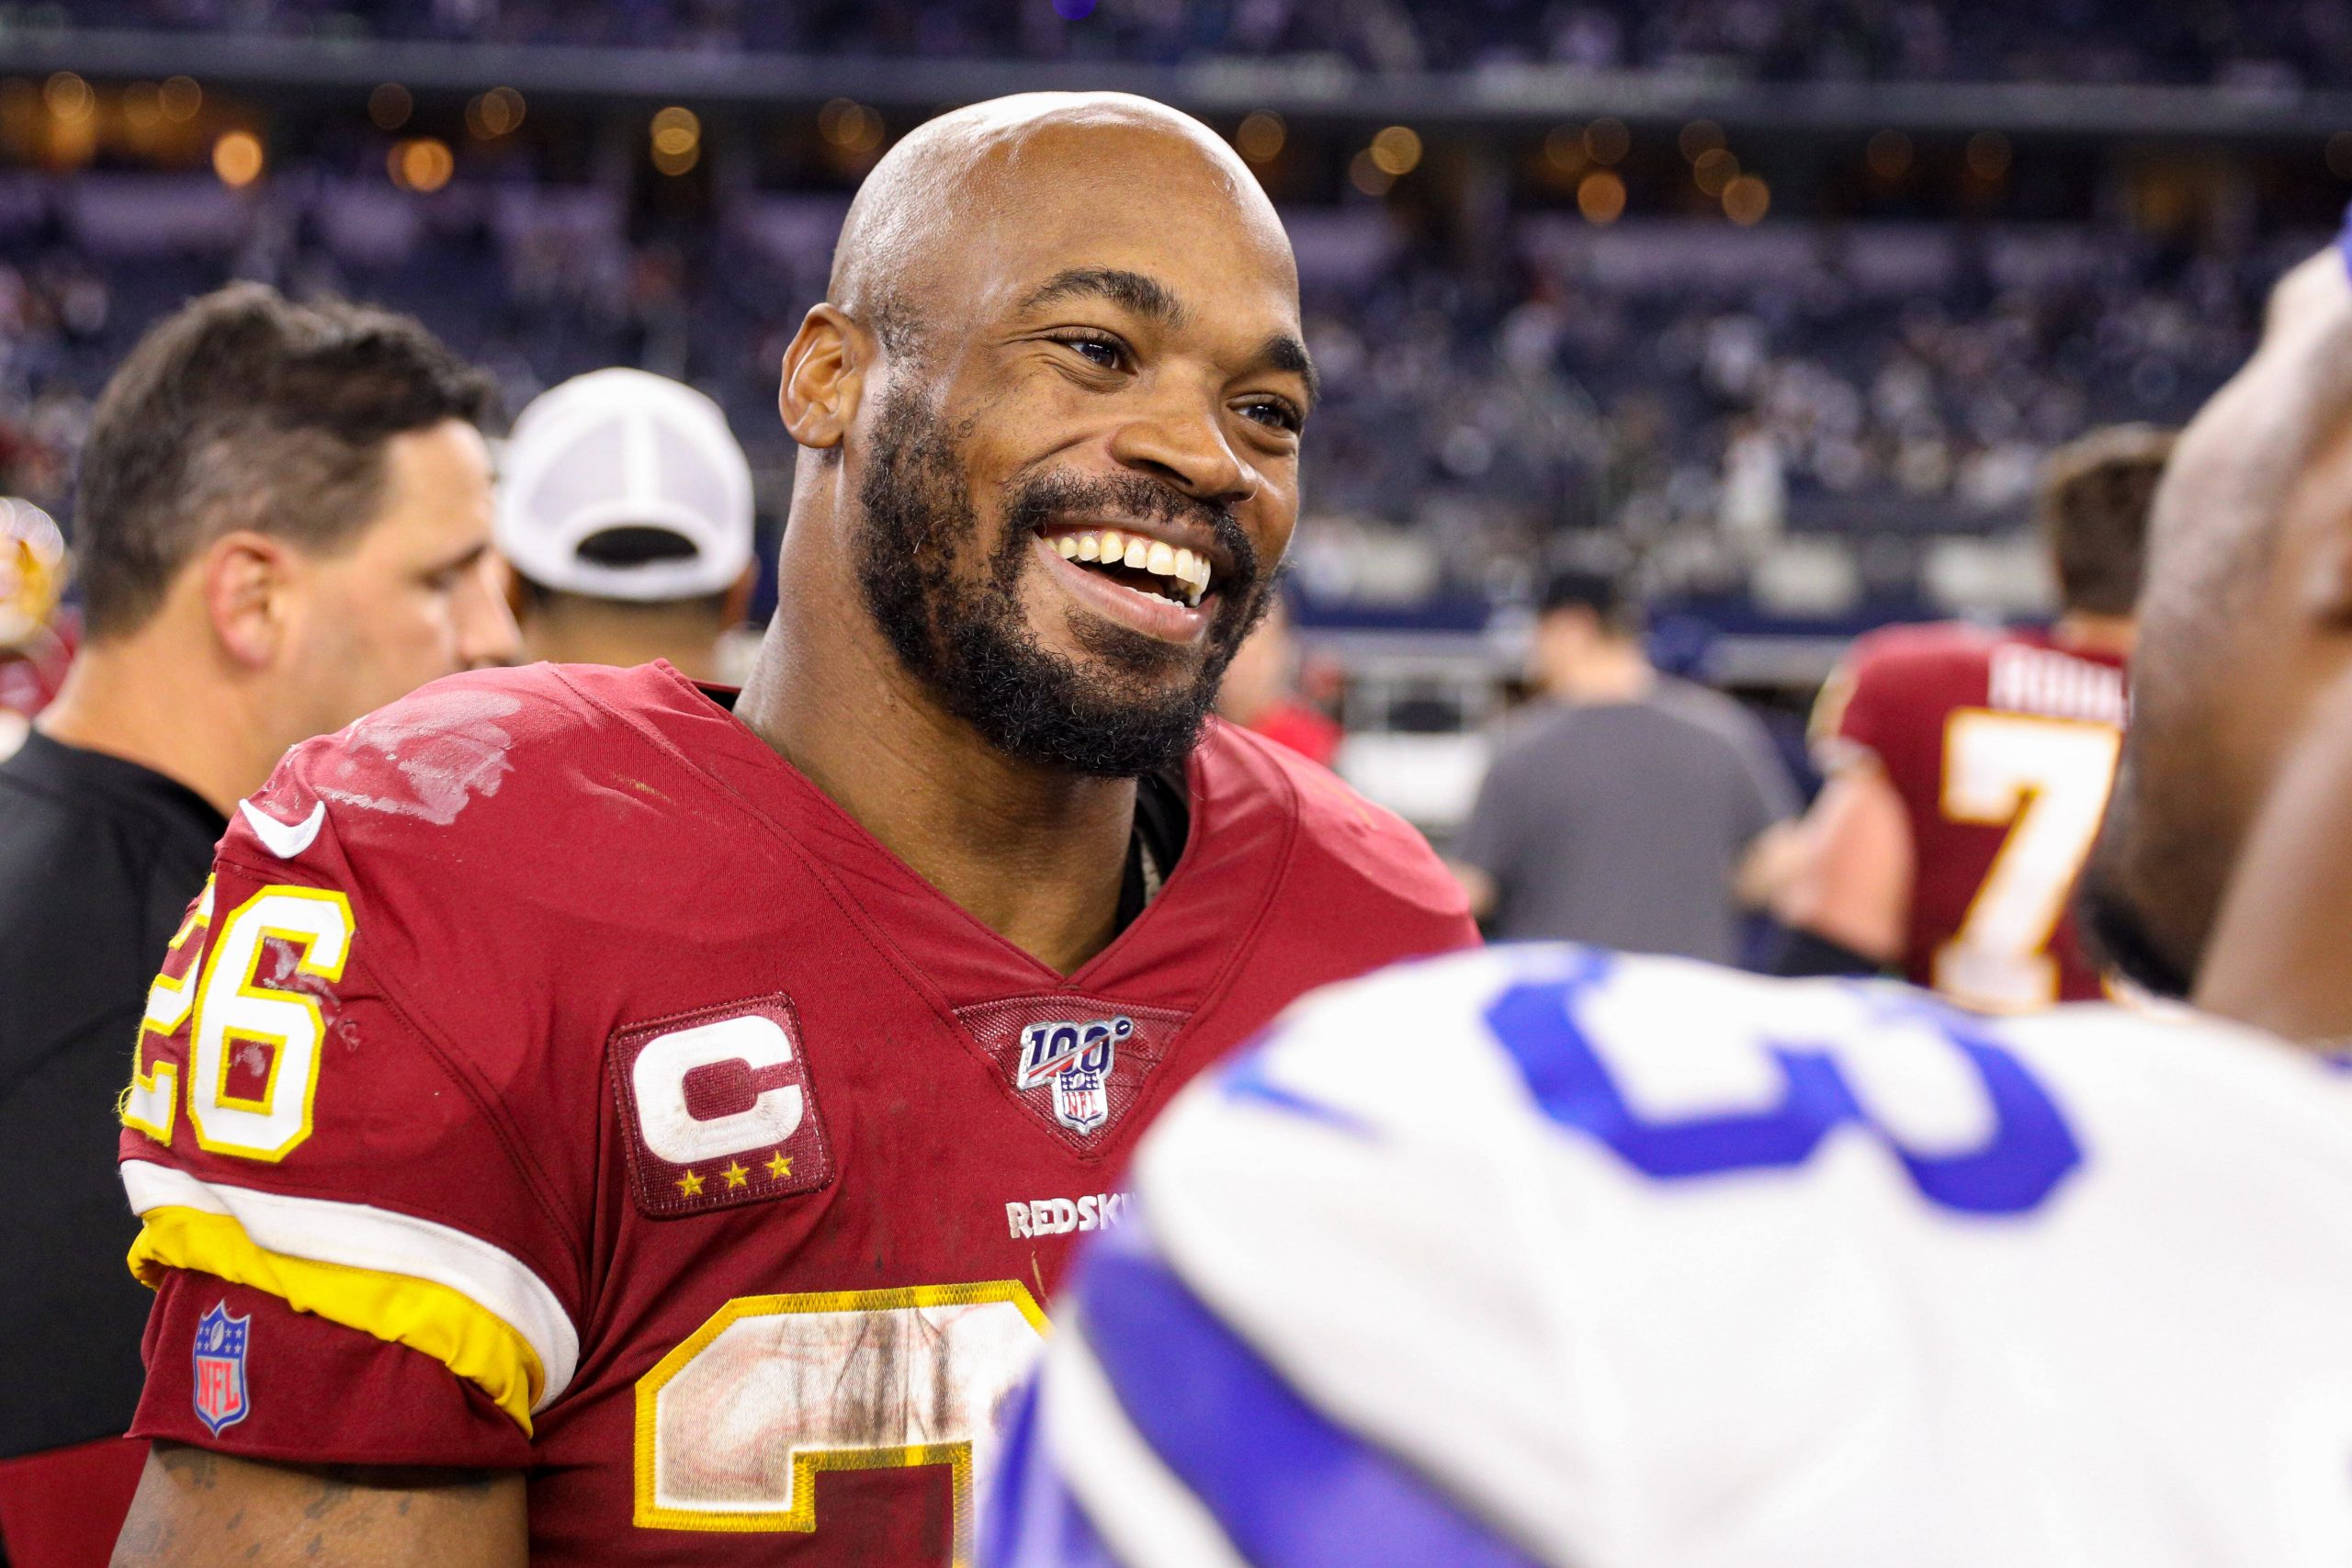 ARLINGTON, TX - DECEMBER 29: Washington Redskins Running Back Adrian Peterson (26) talks with players after the NFC East